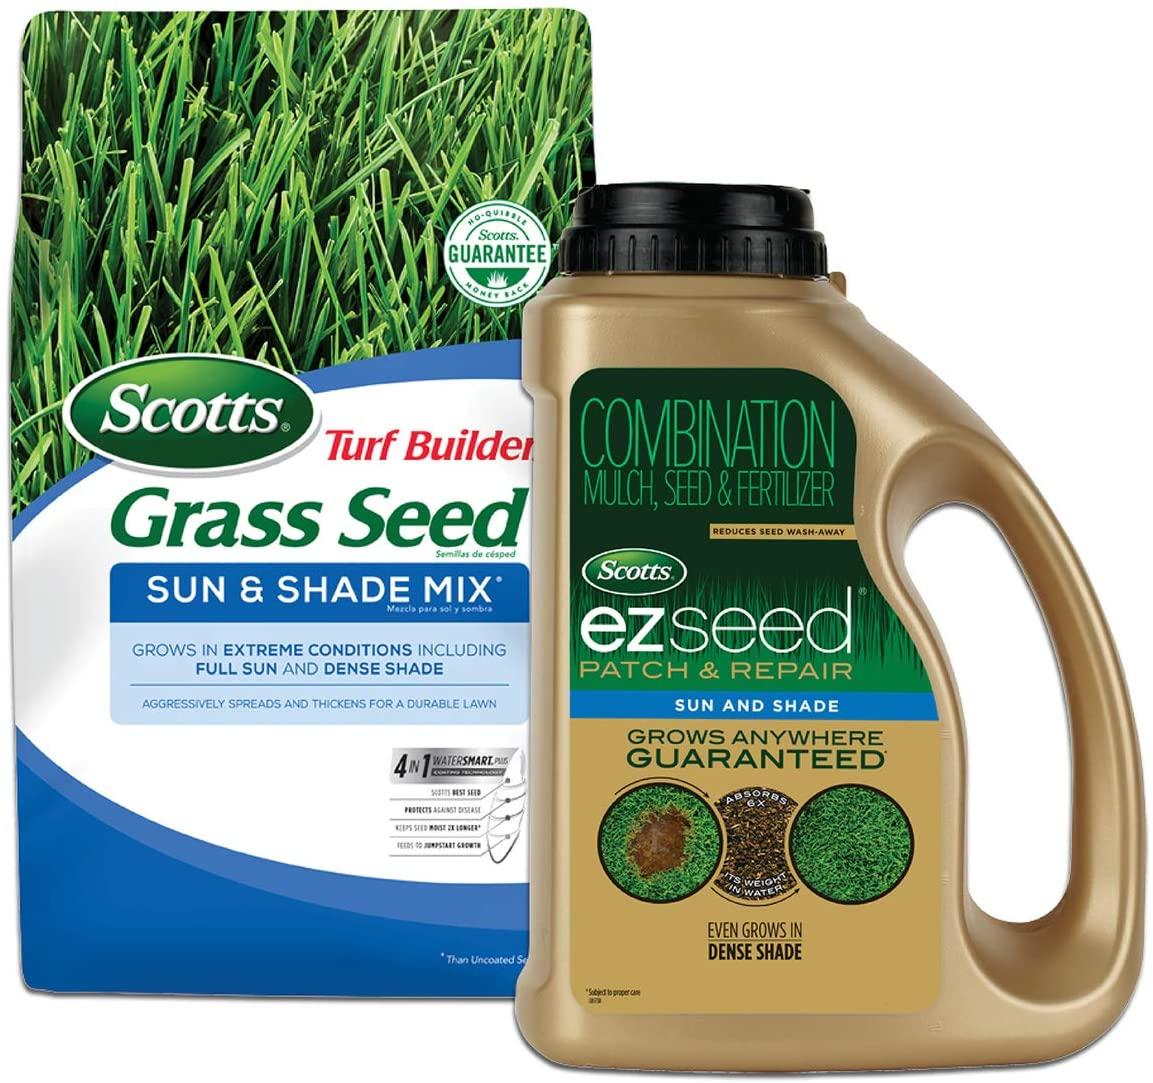 Turf Builder Sun and Shade Grass Seed for $26.78 Shipped